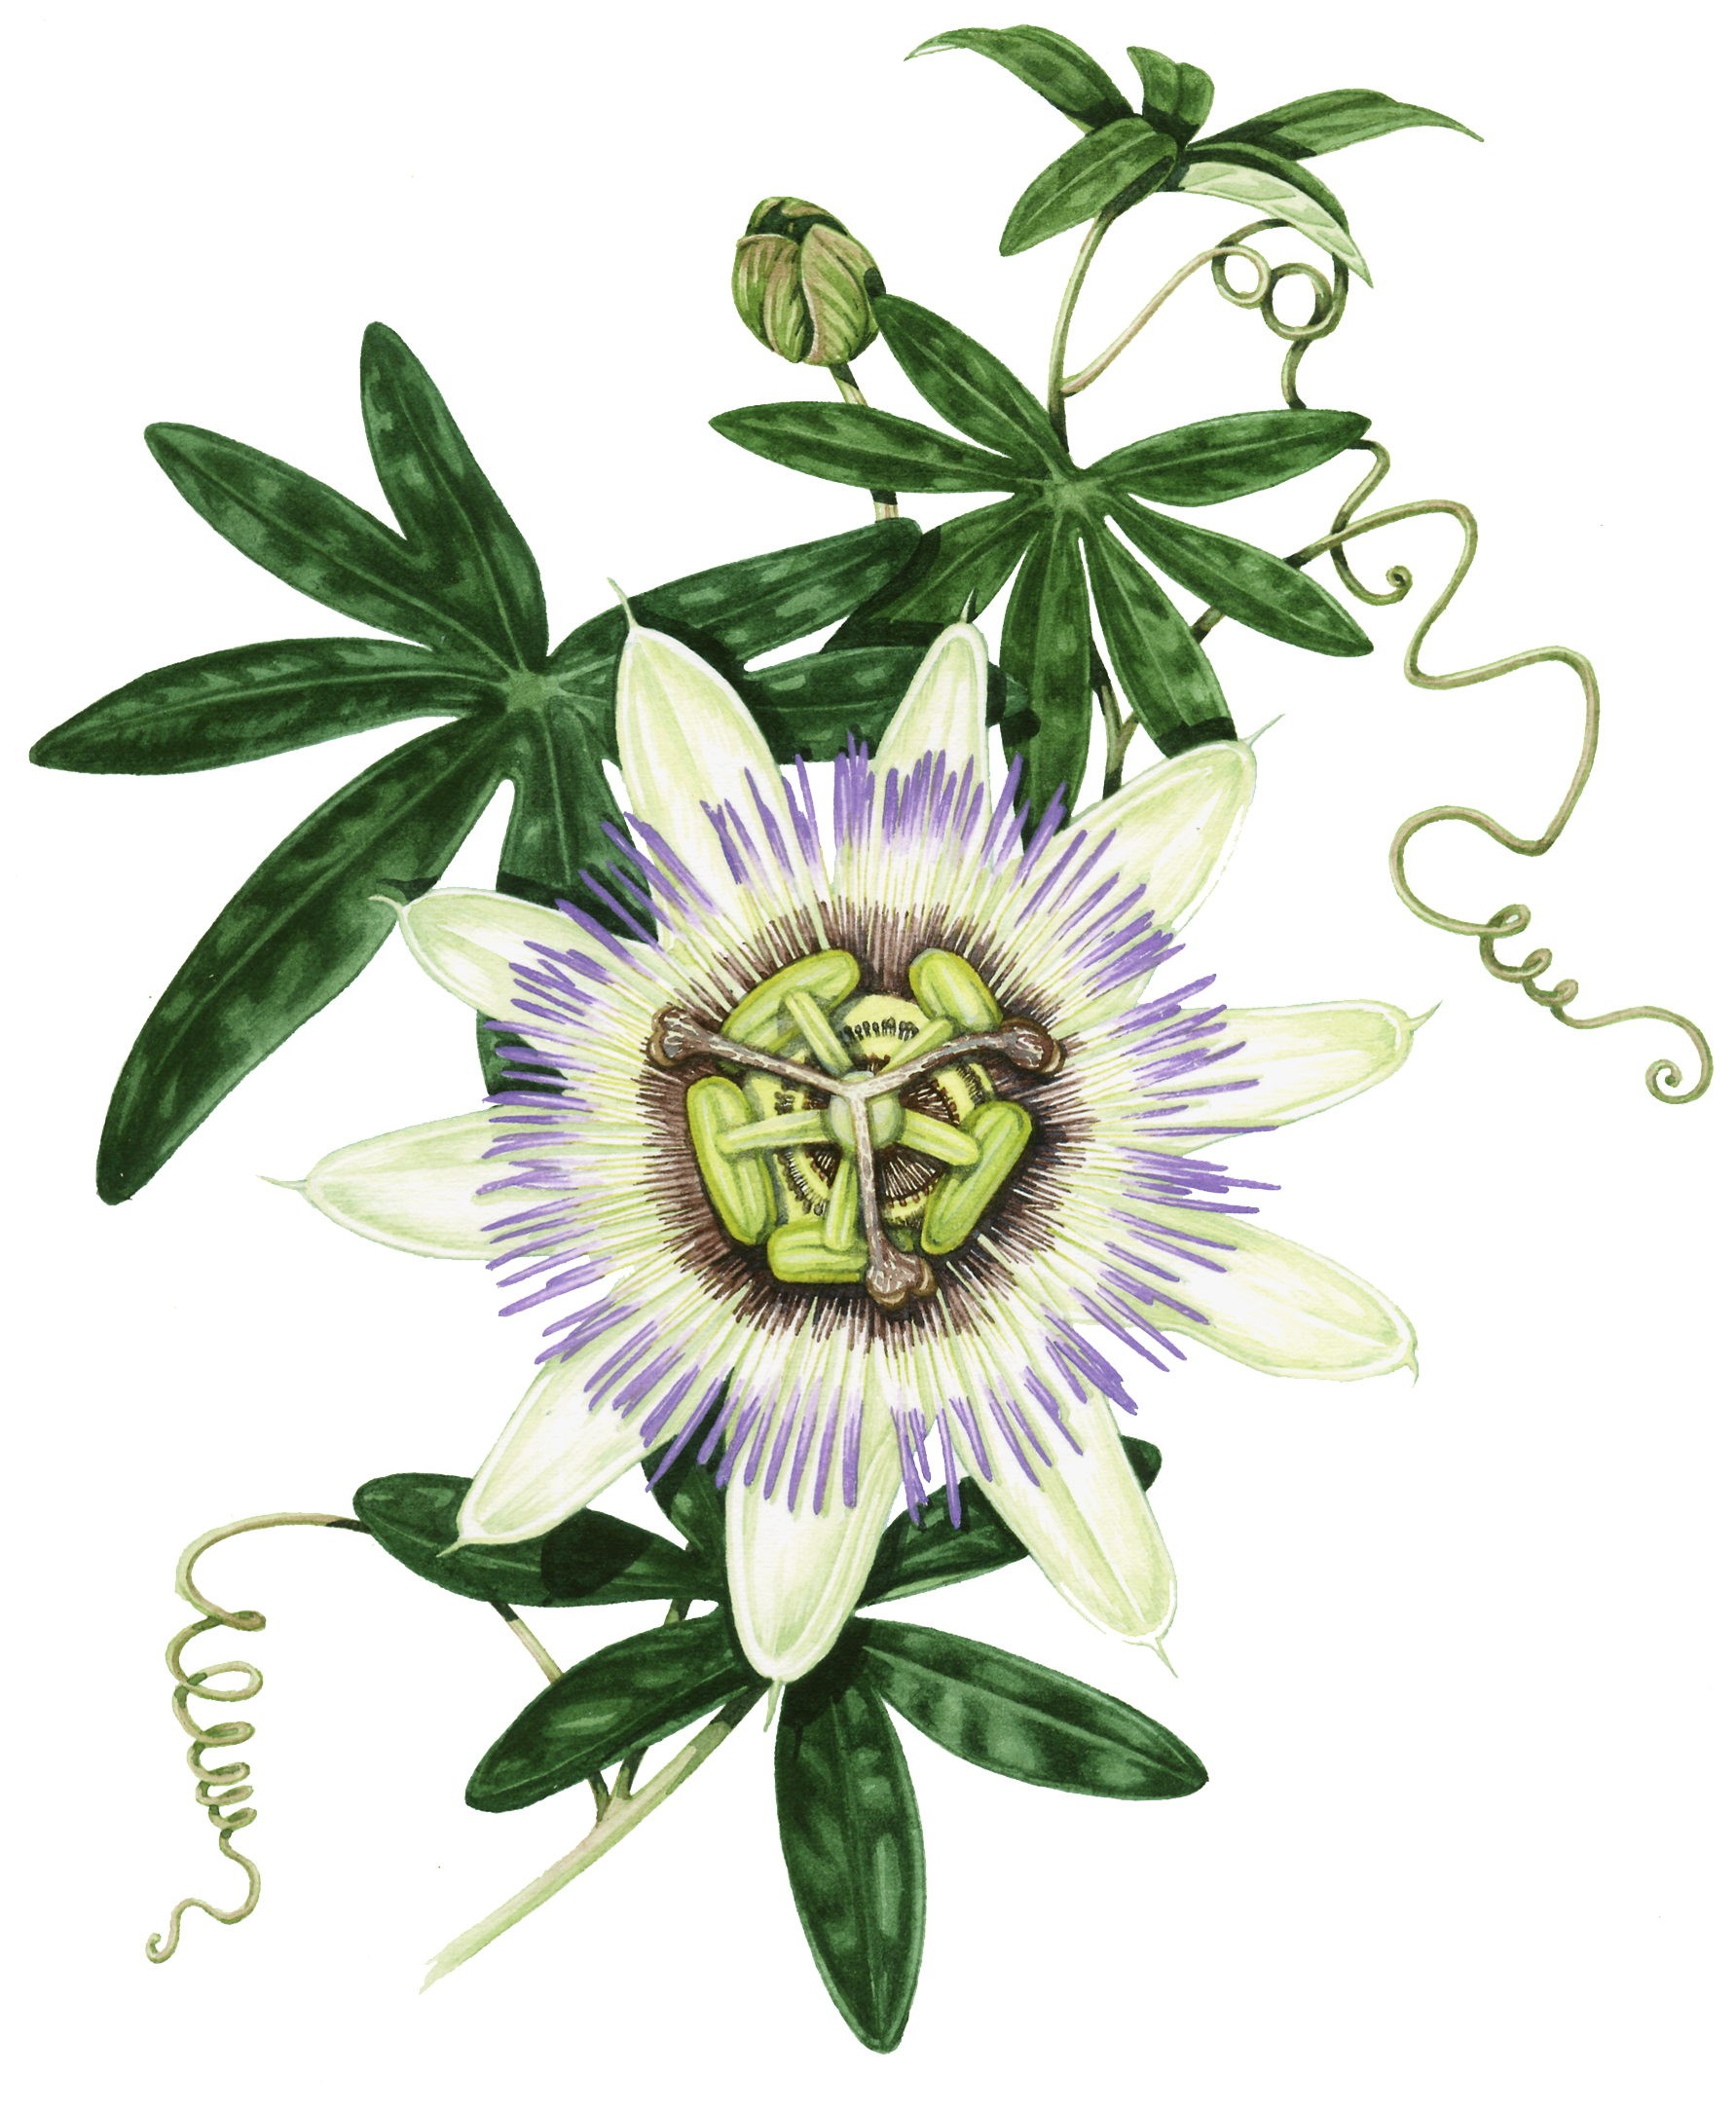 passion flower leaves